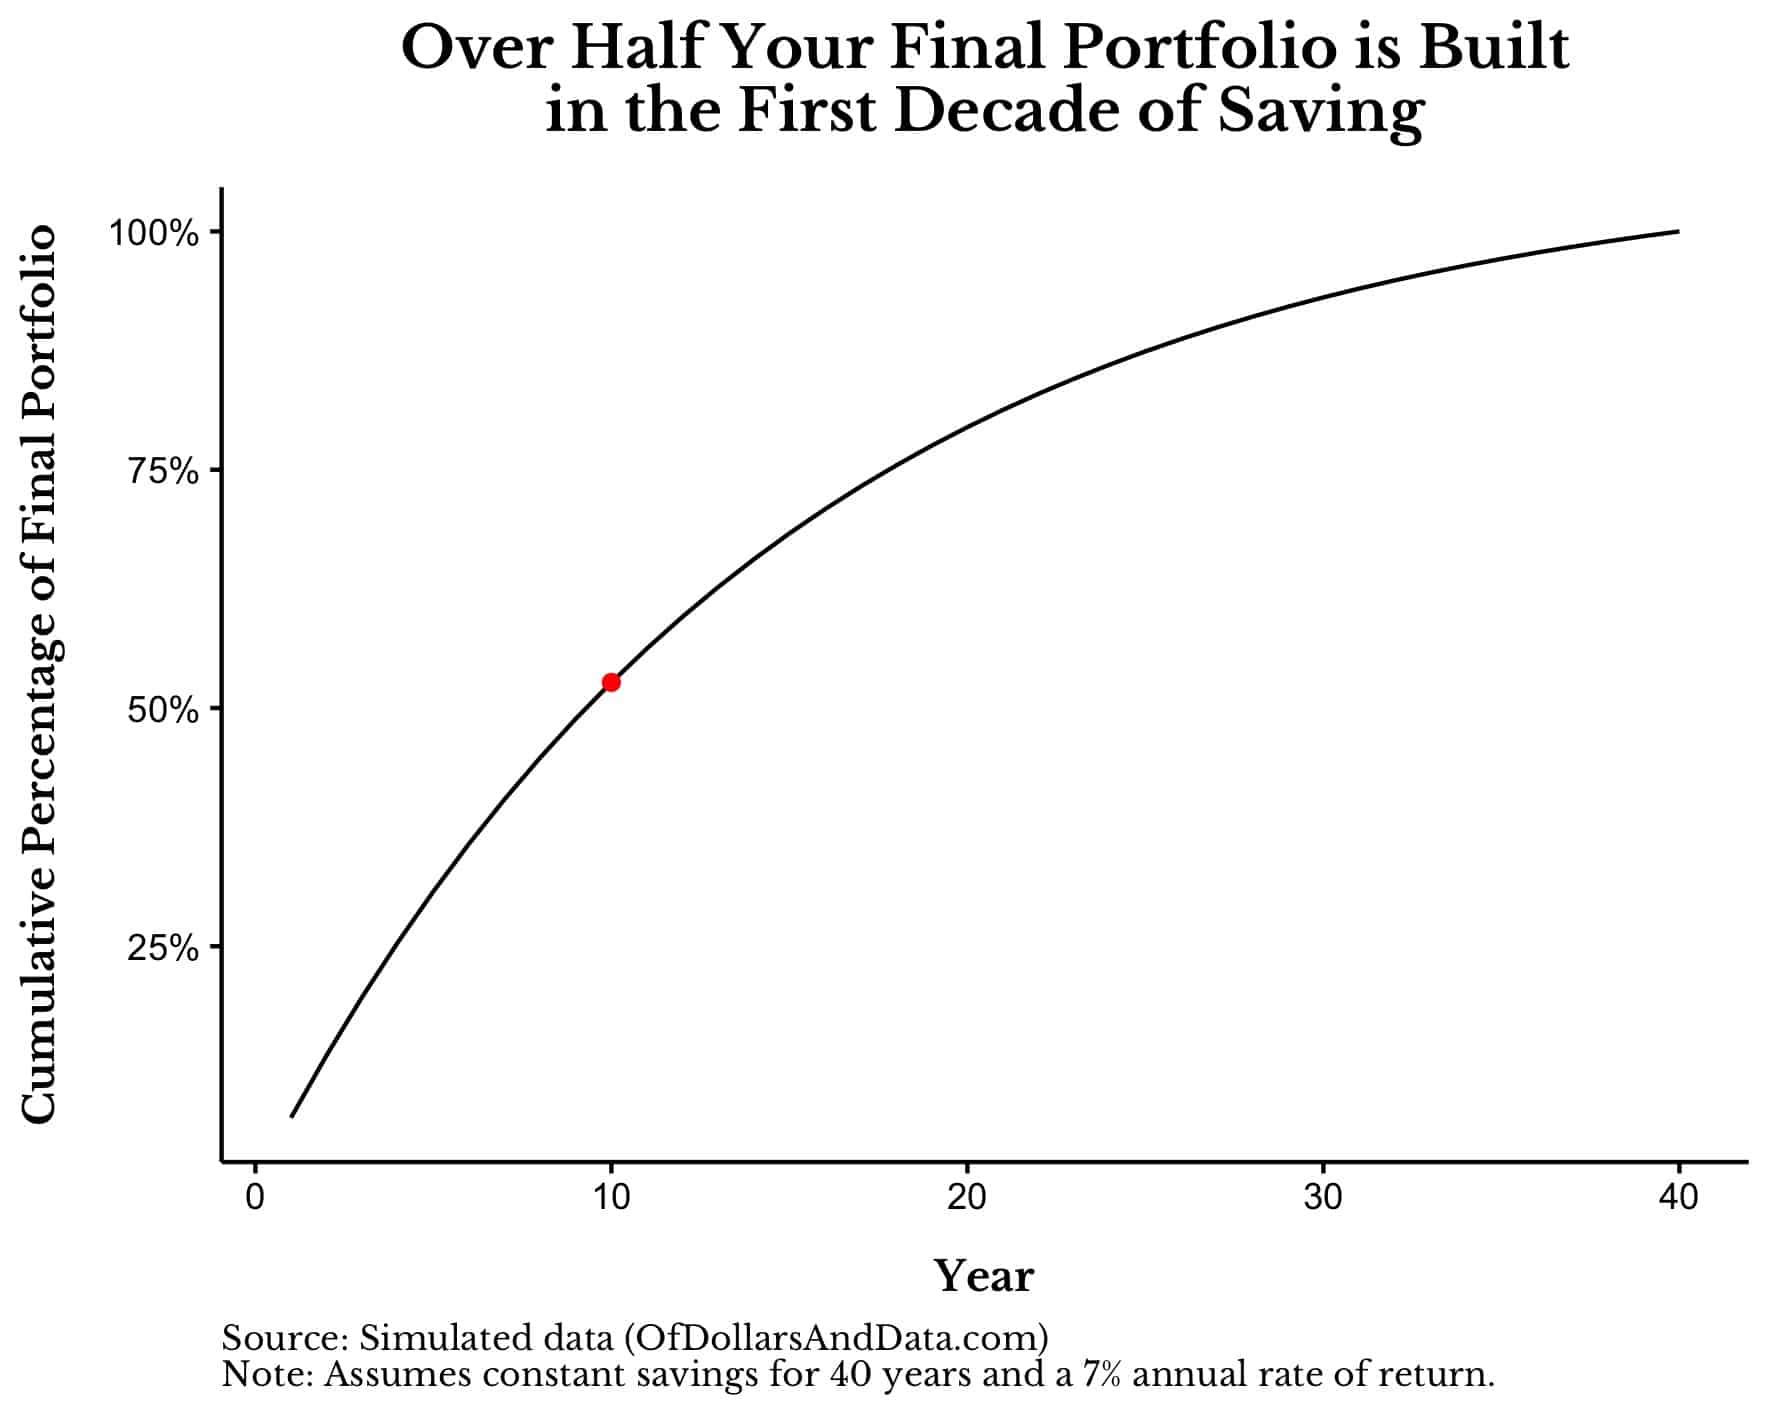 Chart showing how half of your final portfolio value is built in the first decade of saving